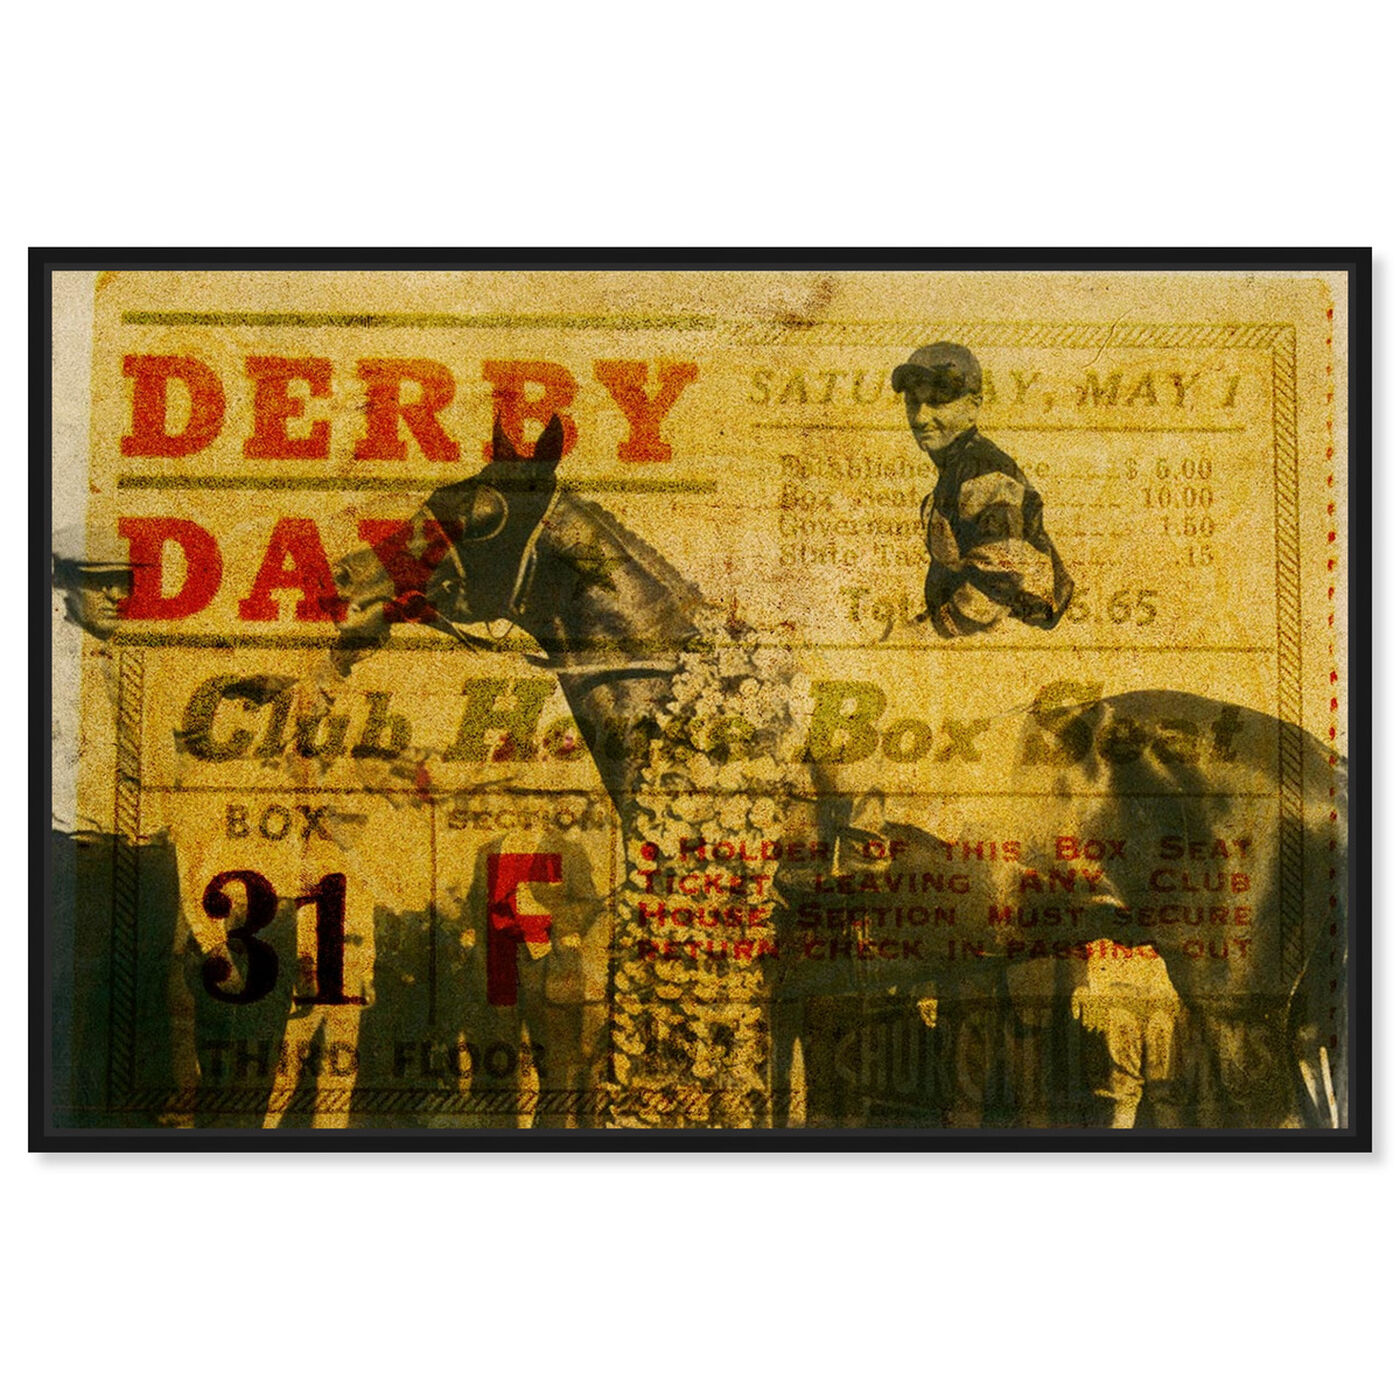 Front view of Derby Day 1943 featuring advertising and posters art.